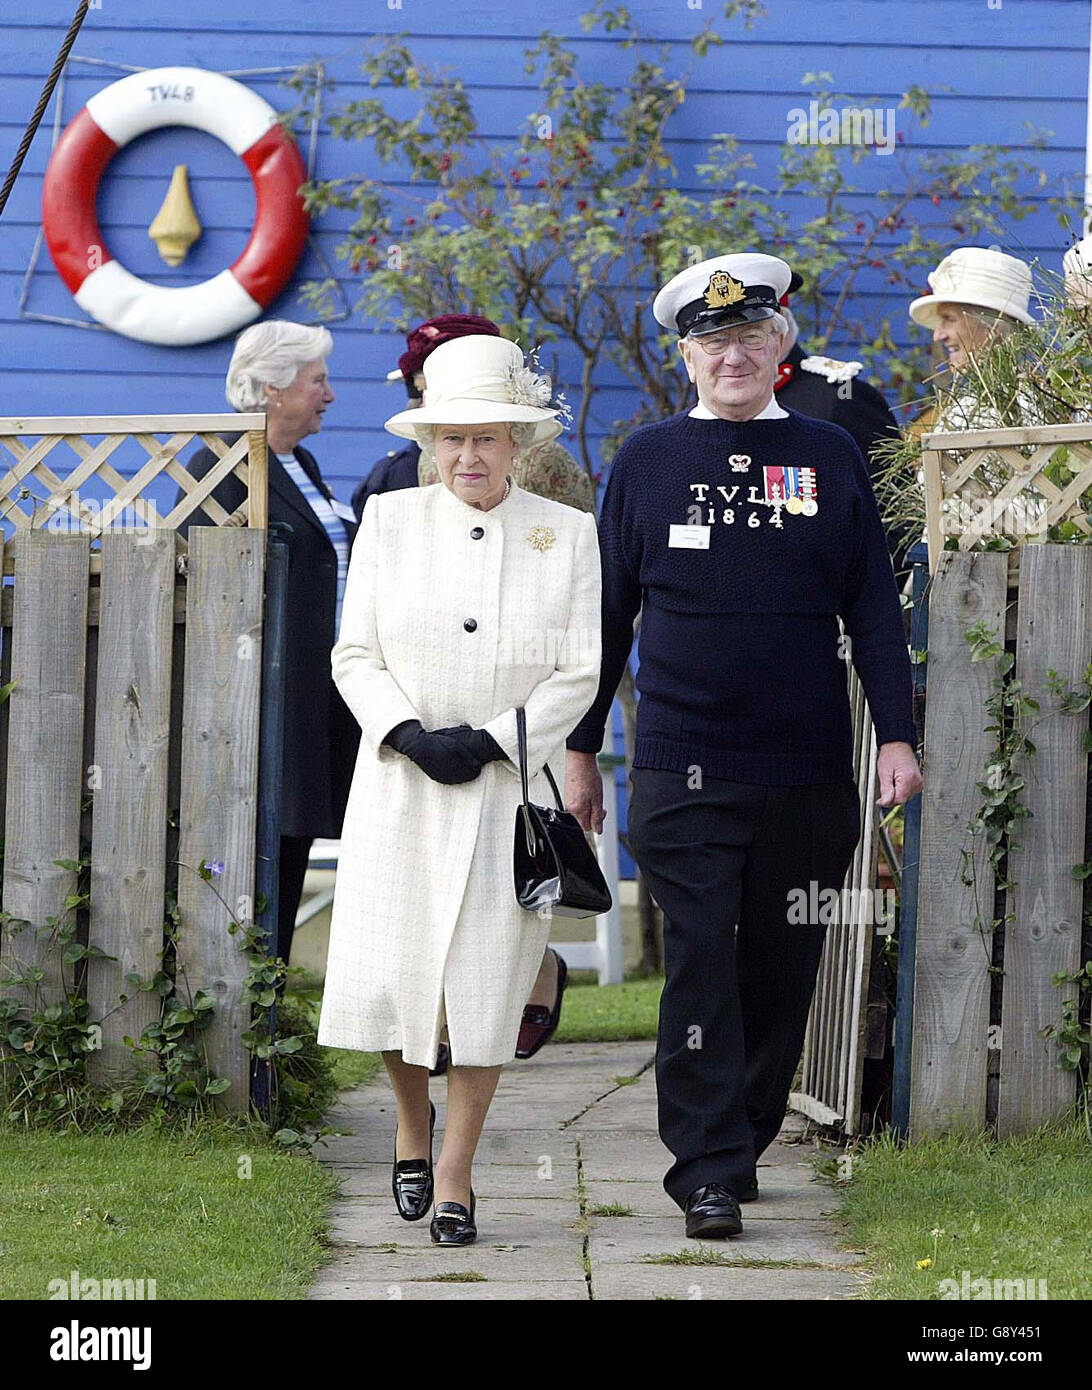 Britain's Queen Elizabeth II walks with Commander of the Tynemouth Volunteer Life Brigade Alec Hastie during her visit to the Tynemouth Volunteer Life Brigade Watch House and Museum, Friday October 14, 2005. See PA Story ROYAL Queen. PRESS ASSOCIATION Photo. Photo credit should read: Owen Humphreys/PA/WPA Rota Stock Photo